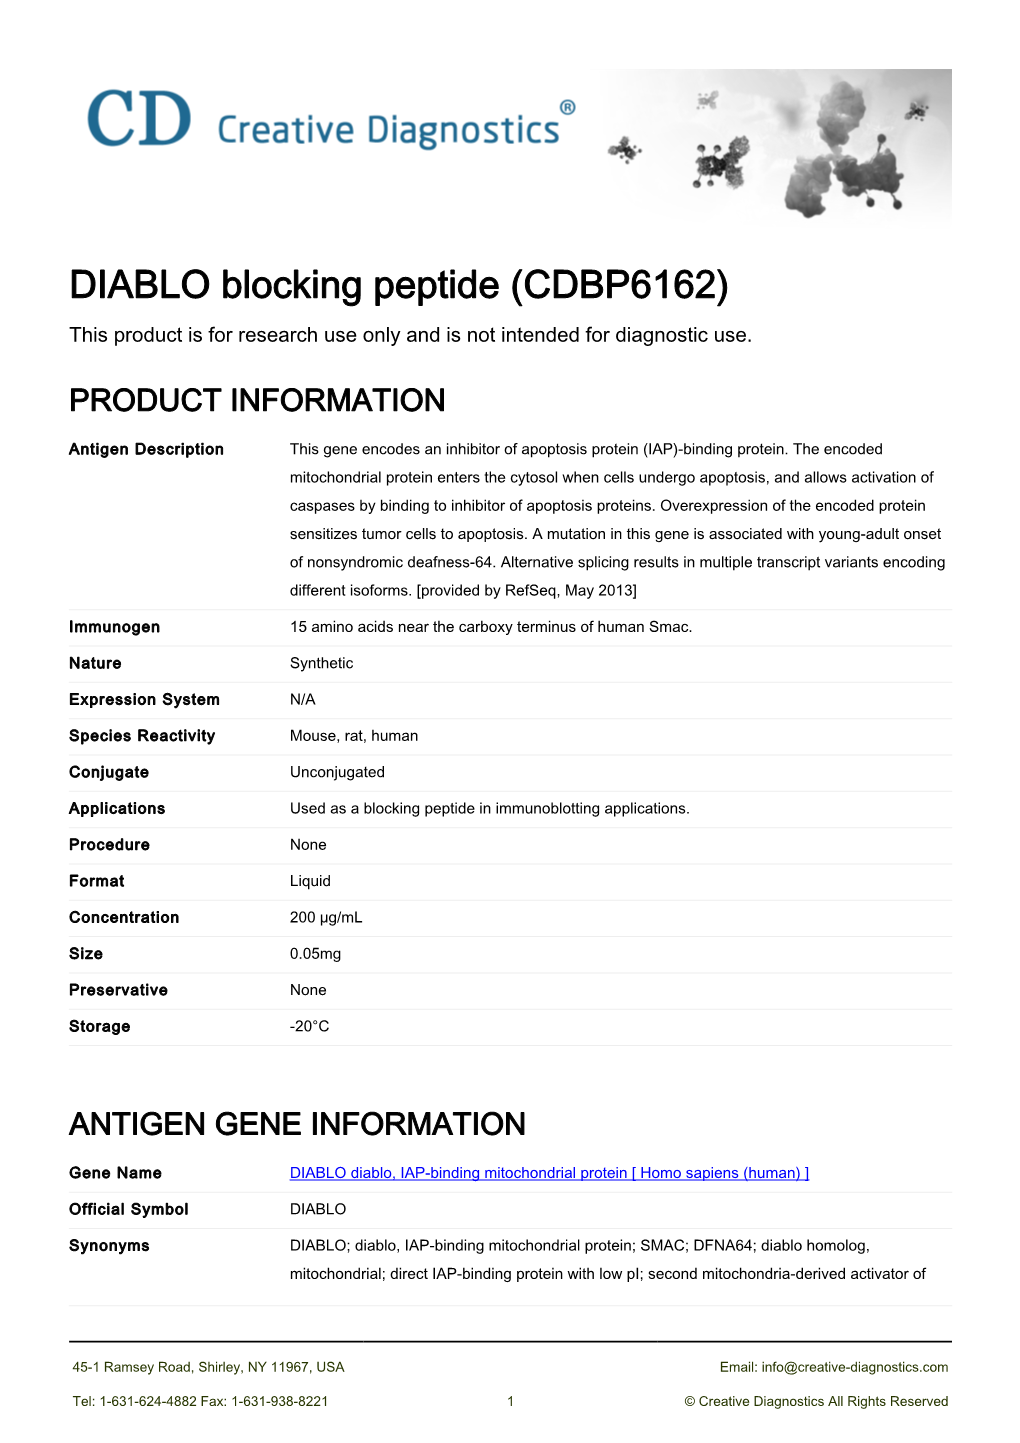 DIABLO Blocking Peptide (CDBP6162) This Product Is for Research Use Only and Is Not Intended for Diagnostic Use